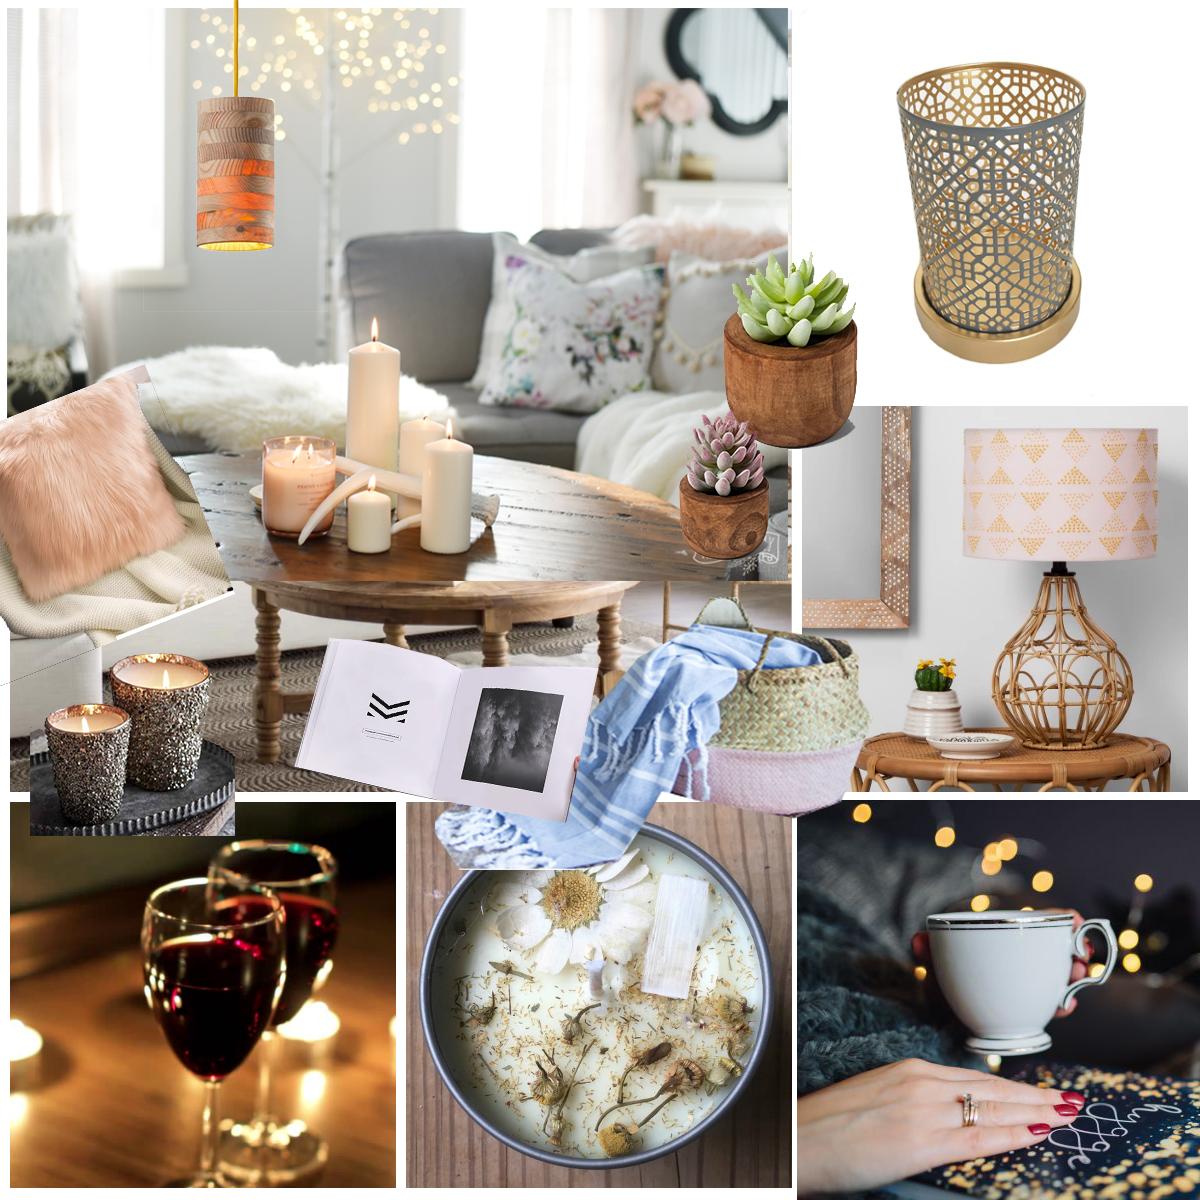 How to bring hygge to your living room